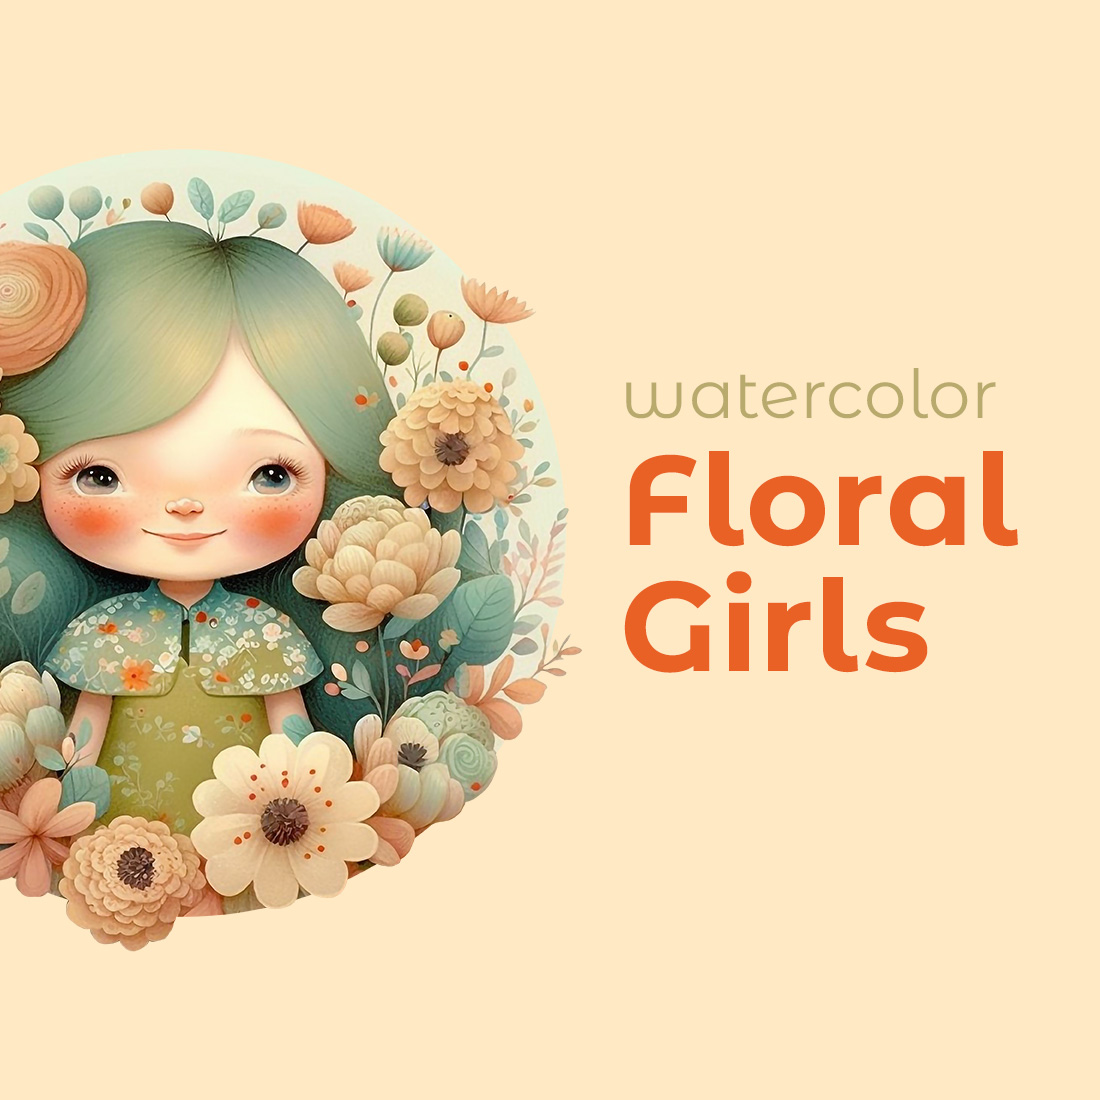 Watercolor Floral Girls cover image.